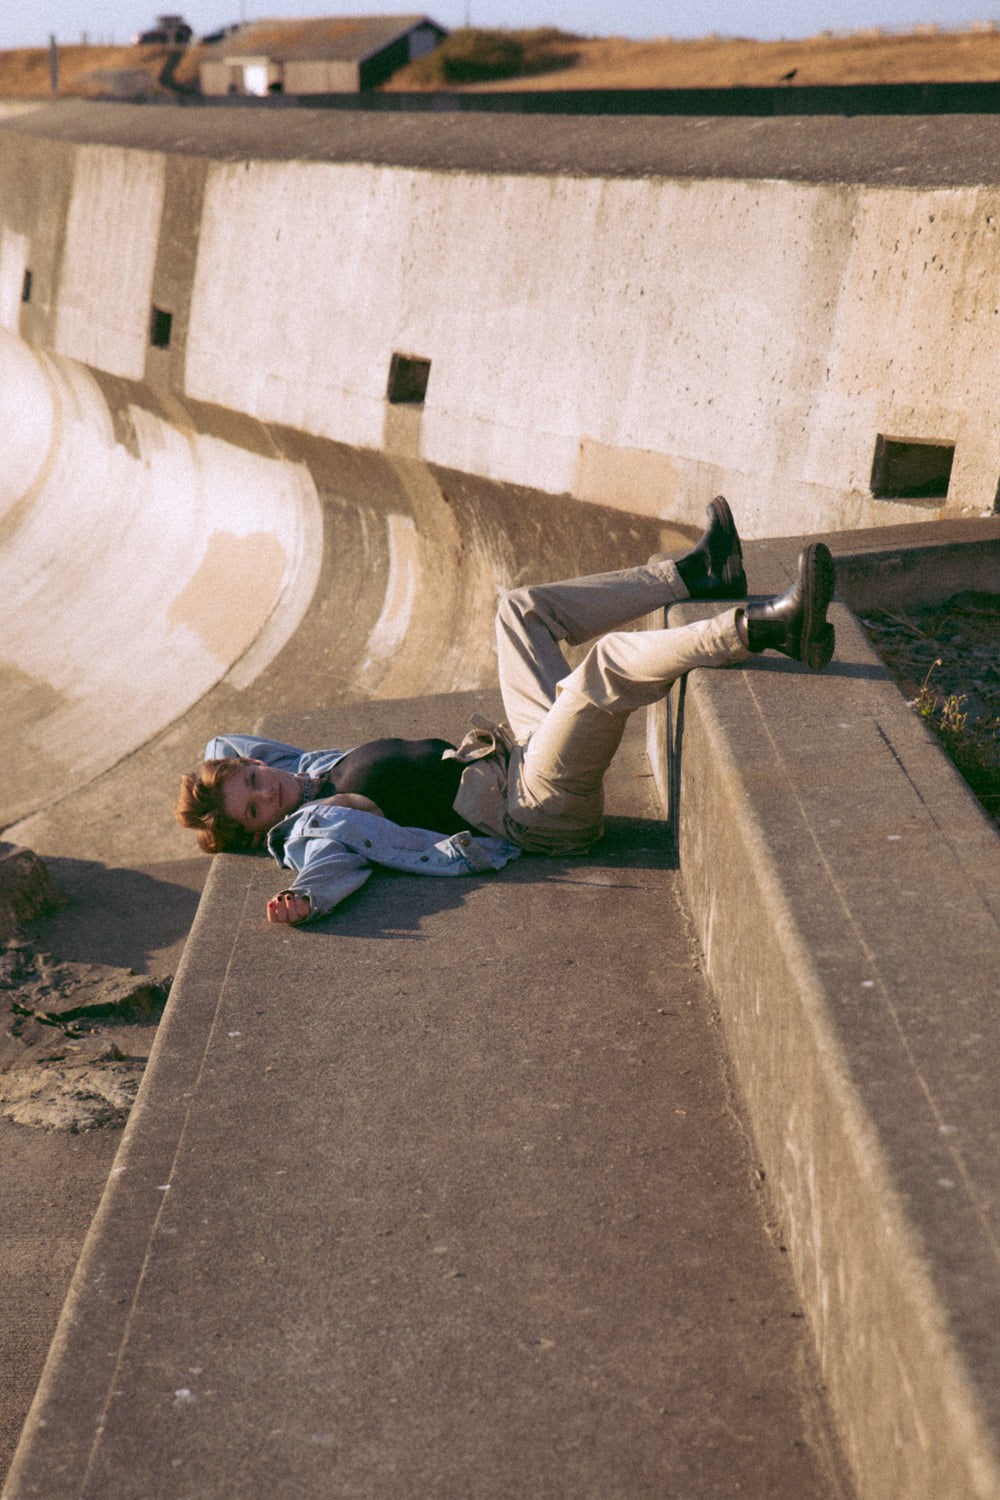 Non binary model sitting upside down on some large cement stairs. They are wearing a jean jacket and have short hair.